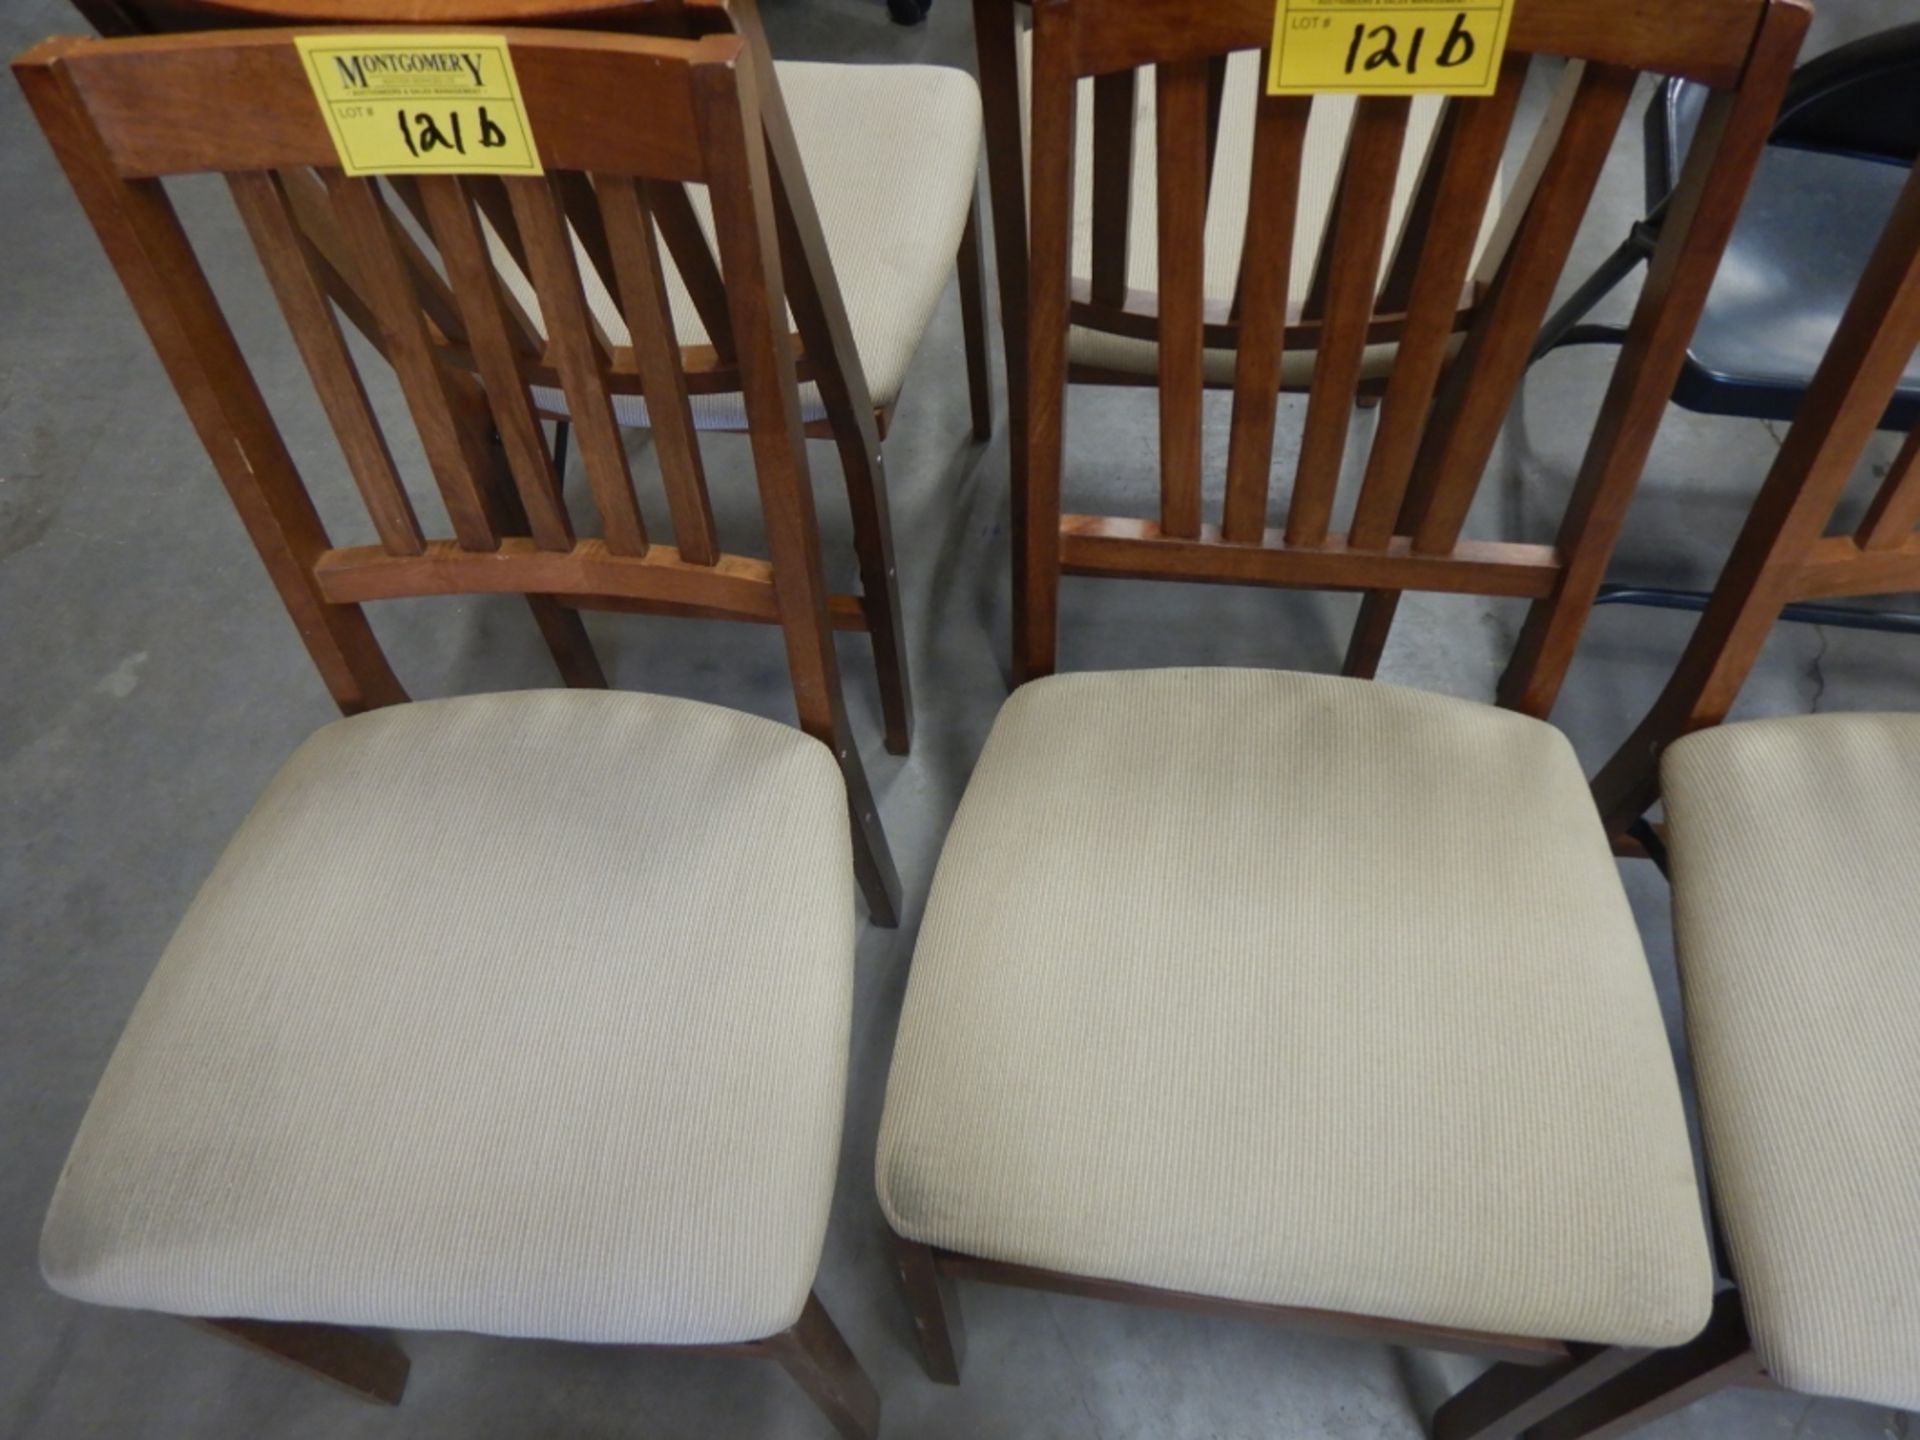 5-WOODEN FOLDING CHAIRS W/ FABRIC CUSHIONS - Image 3 of 3